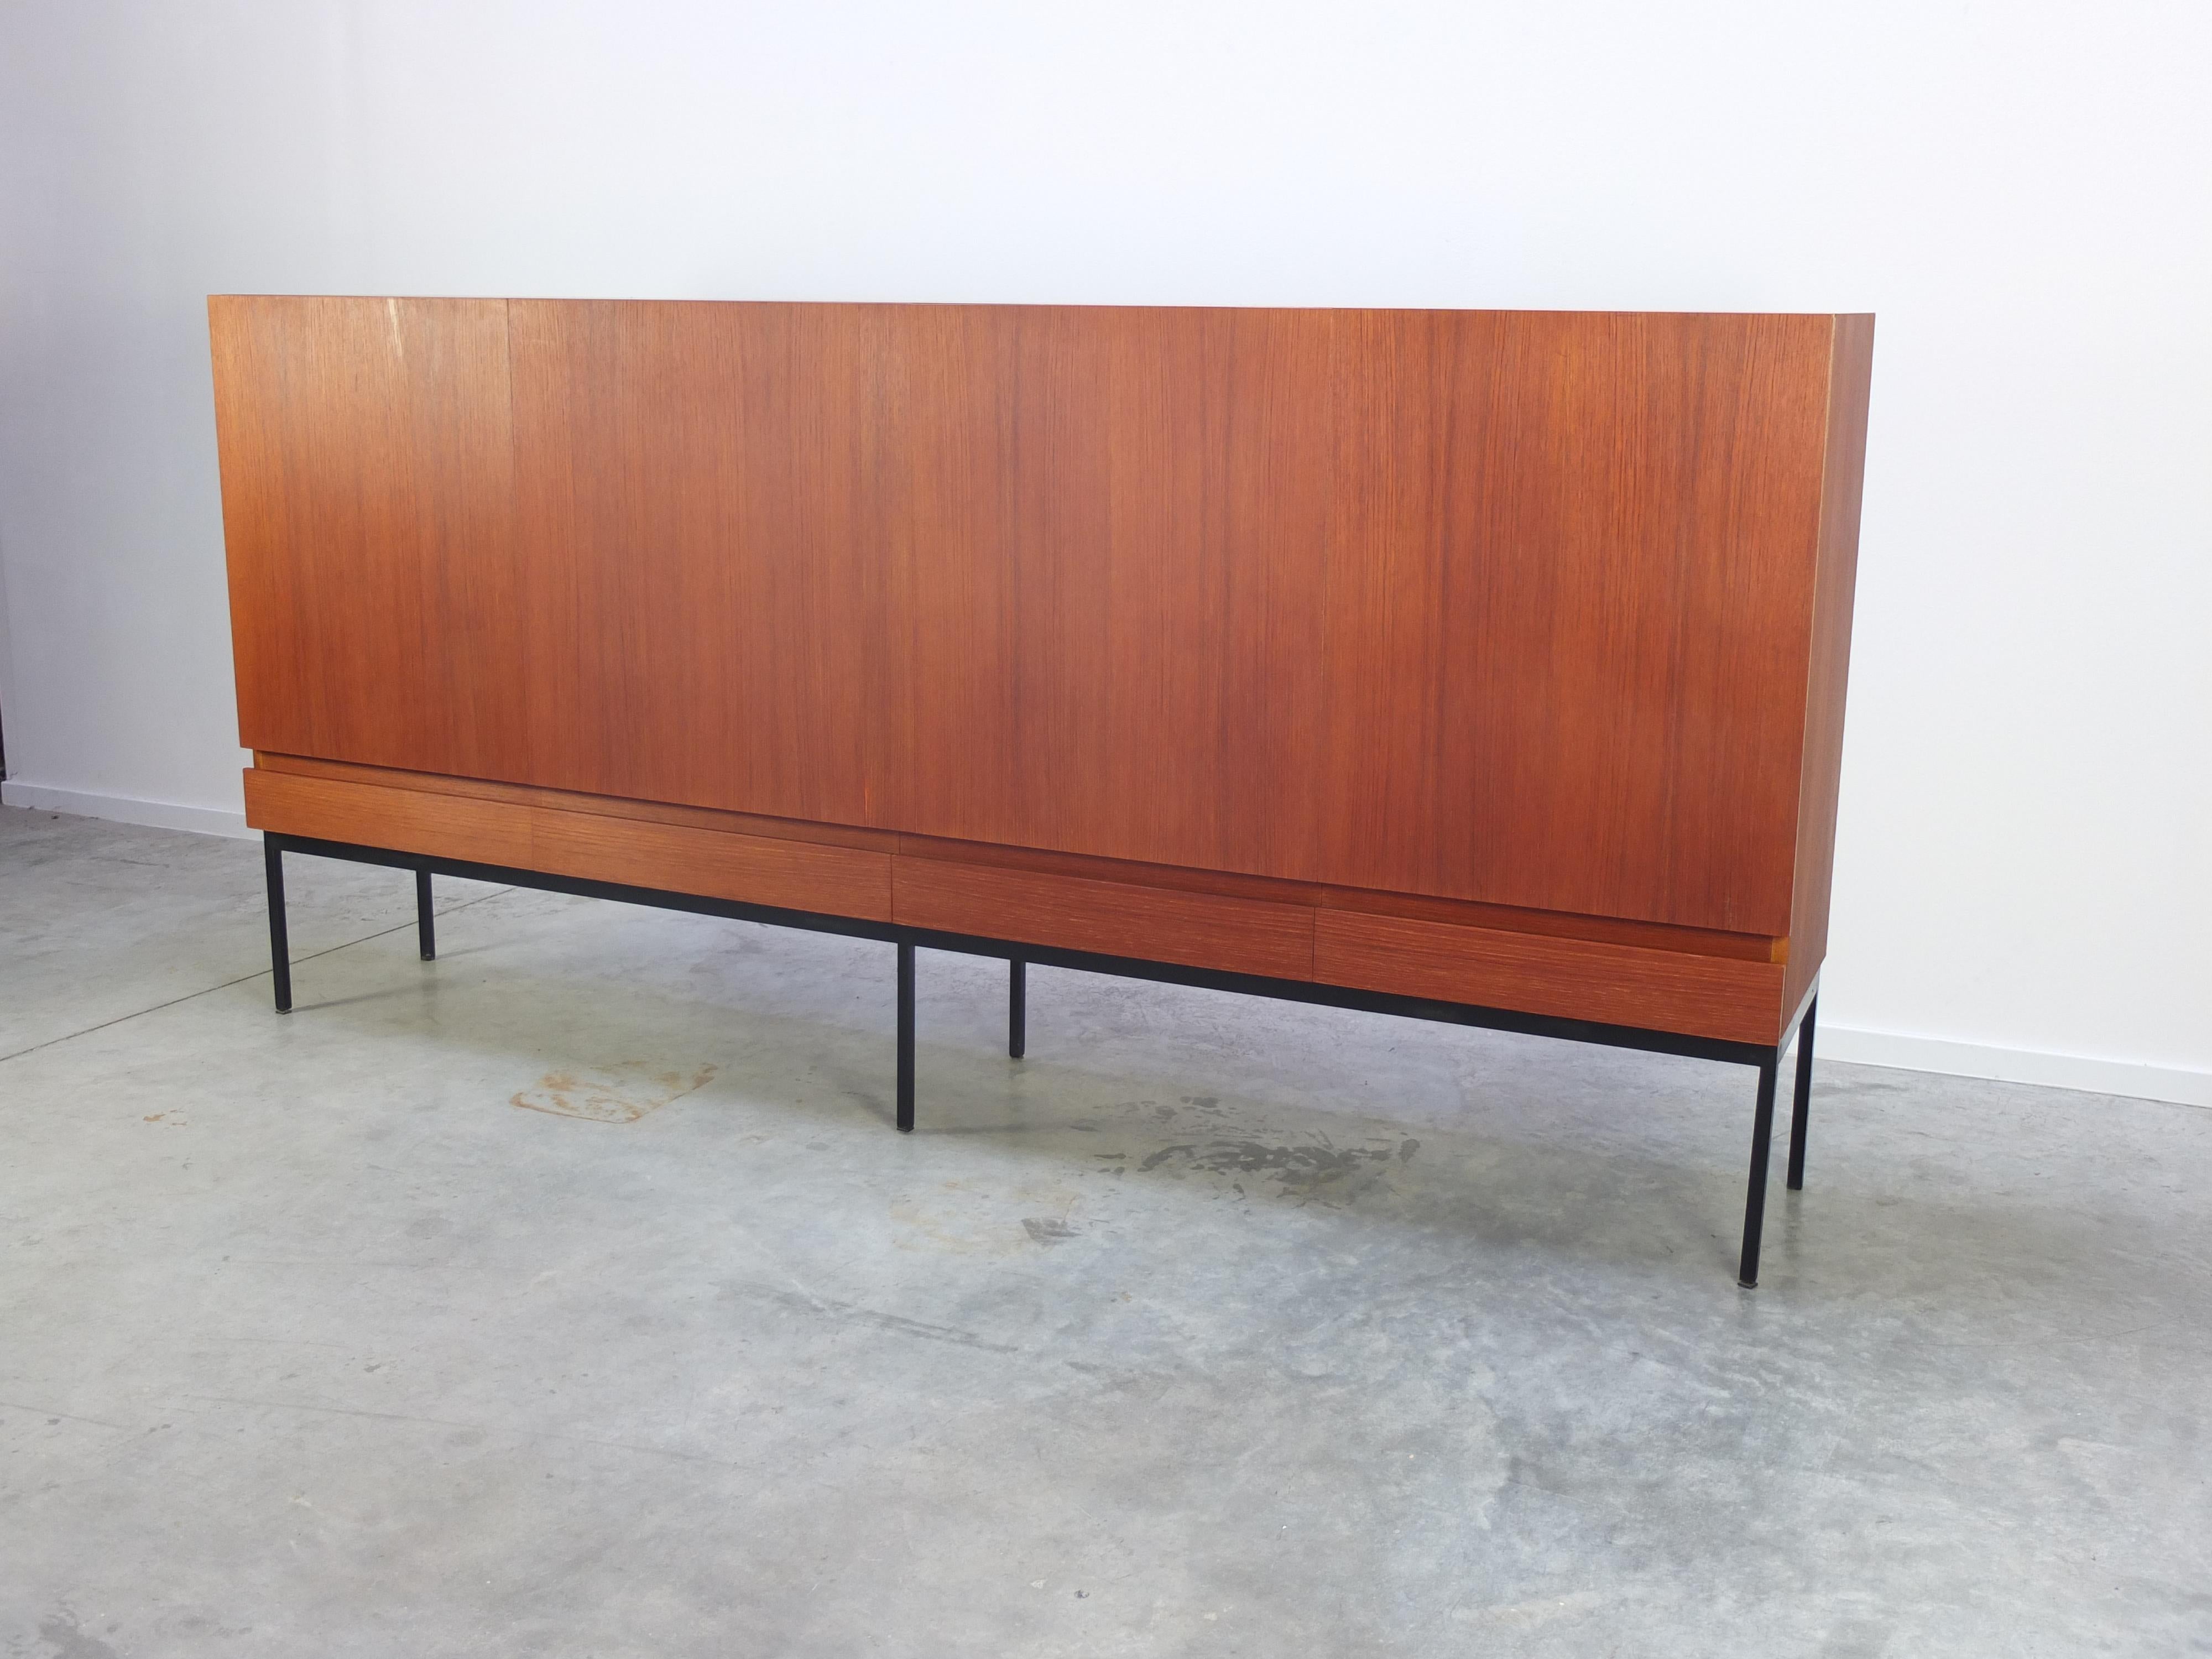 Fantastic minimalistic highboard designed by Swiss architect Dieter Waeckerlin for Behr Möbel in Germany in the 1950s. A great modernist and purist design made of teak wood on a slim black lacquered metal base. Lots of storage inside and finished